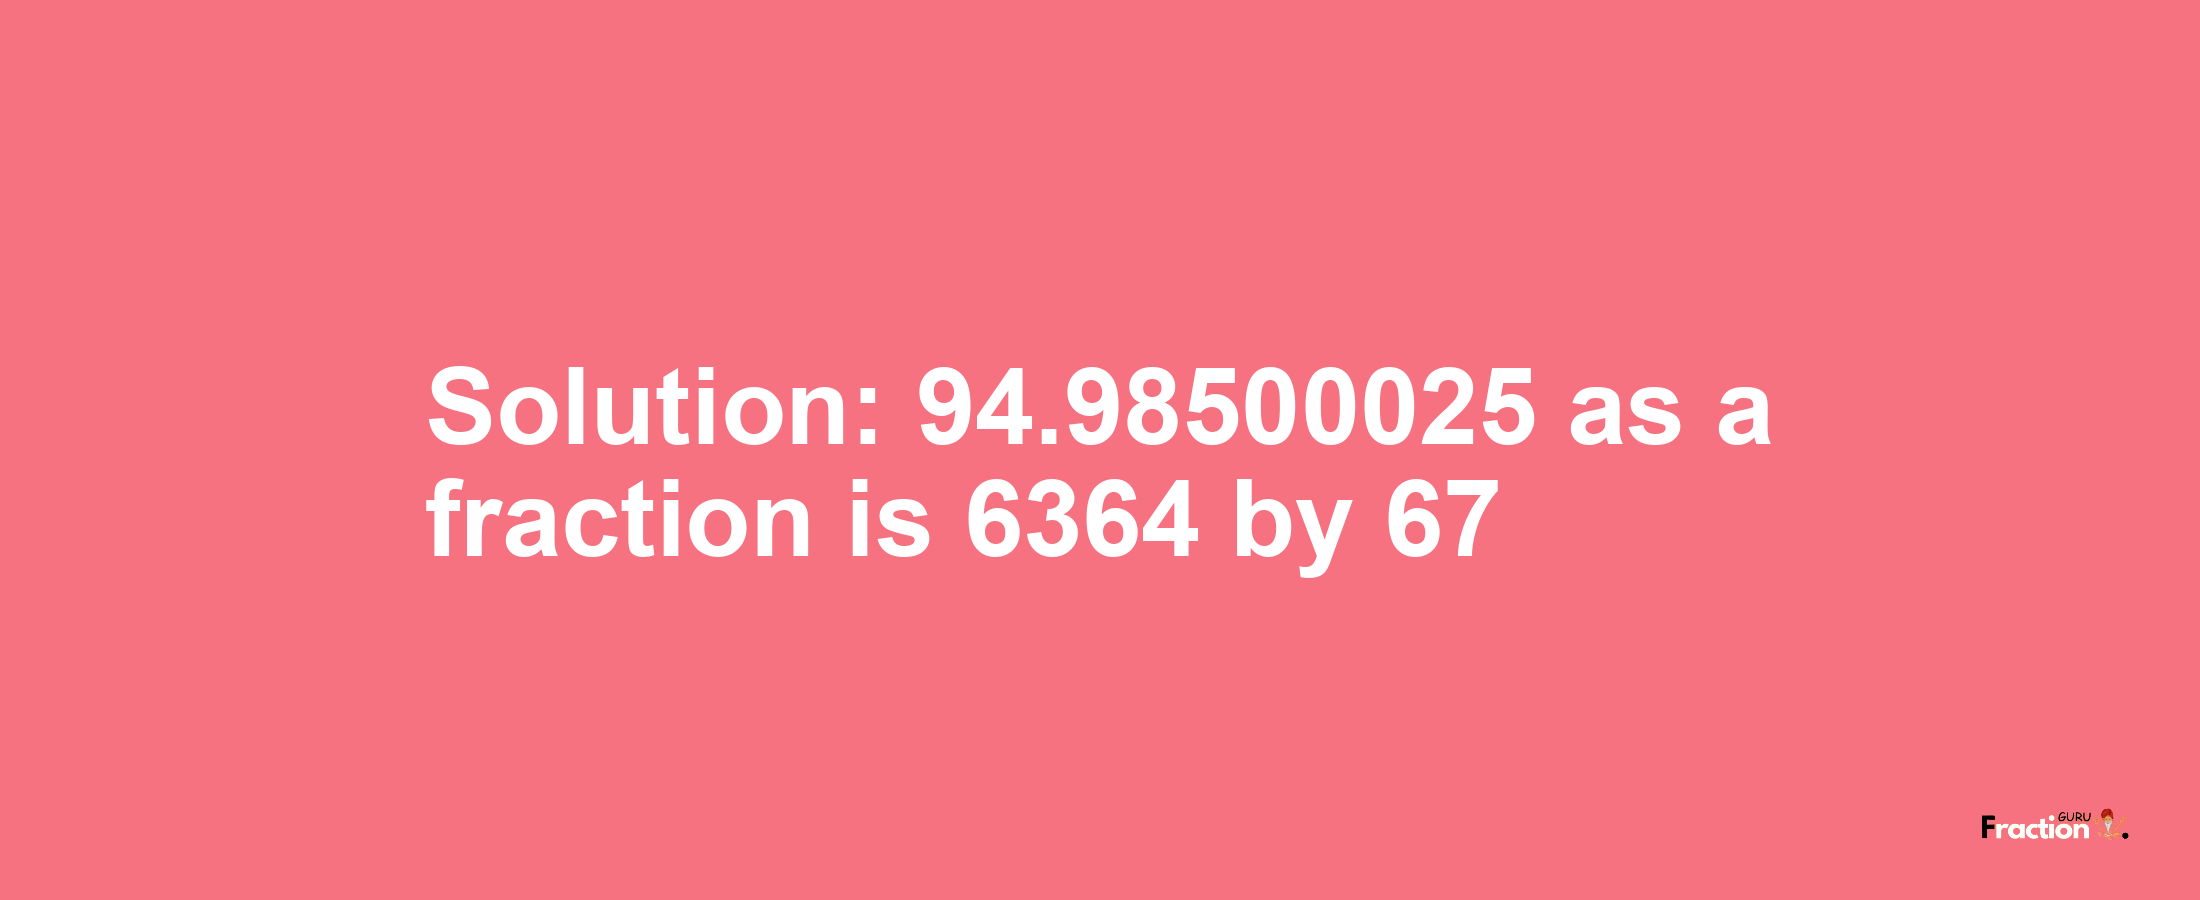 Solution:94.98500025 as a fraction is 6364/67